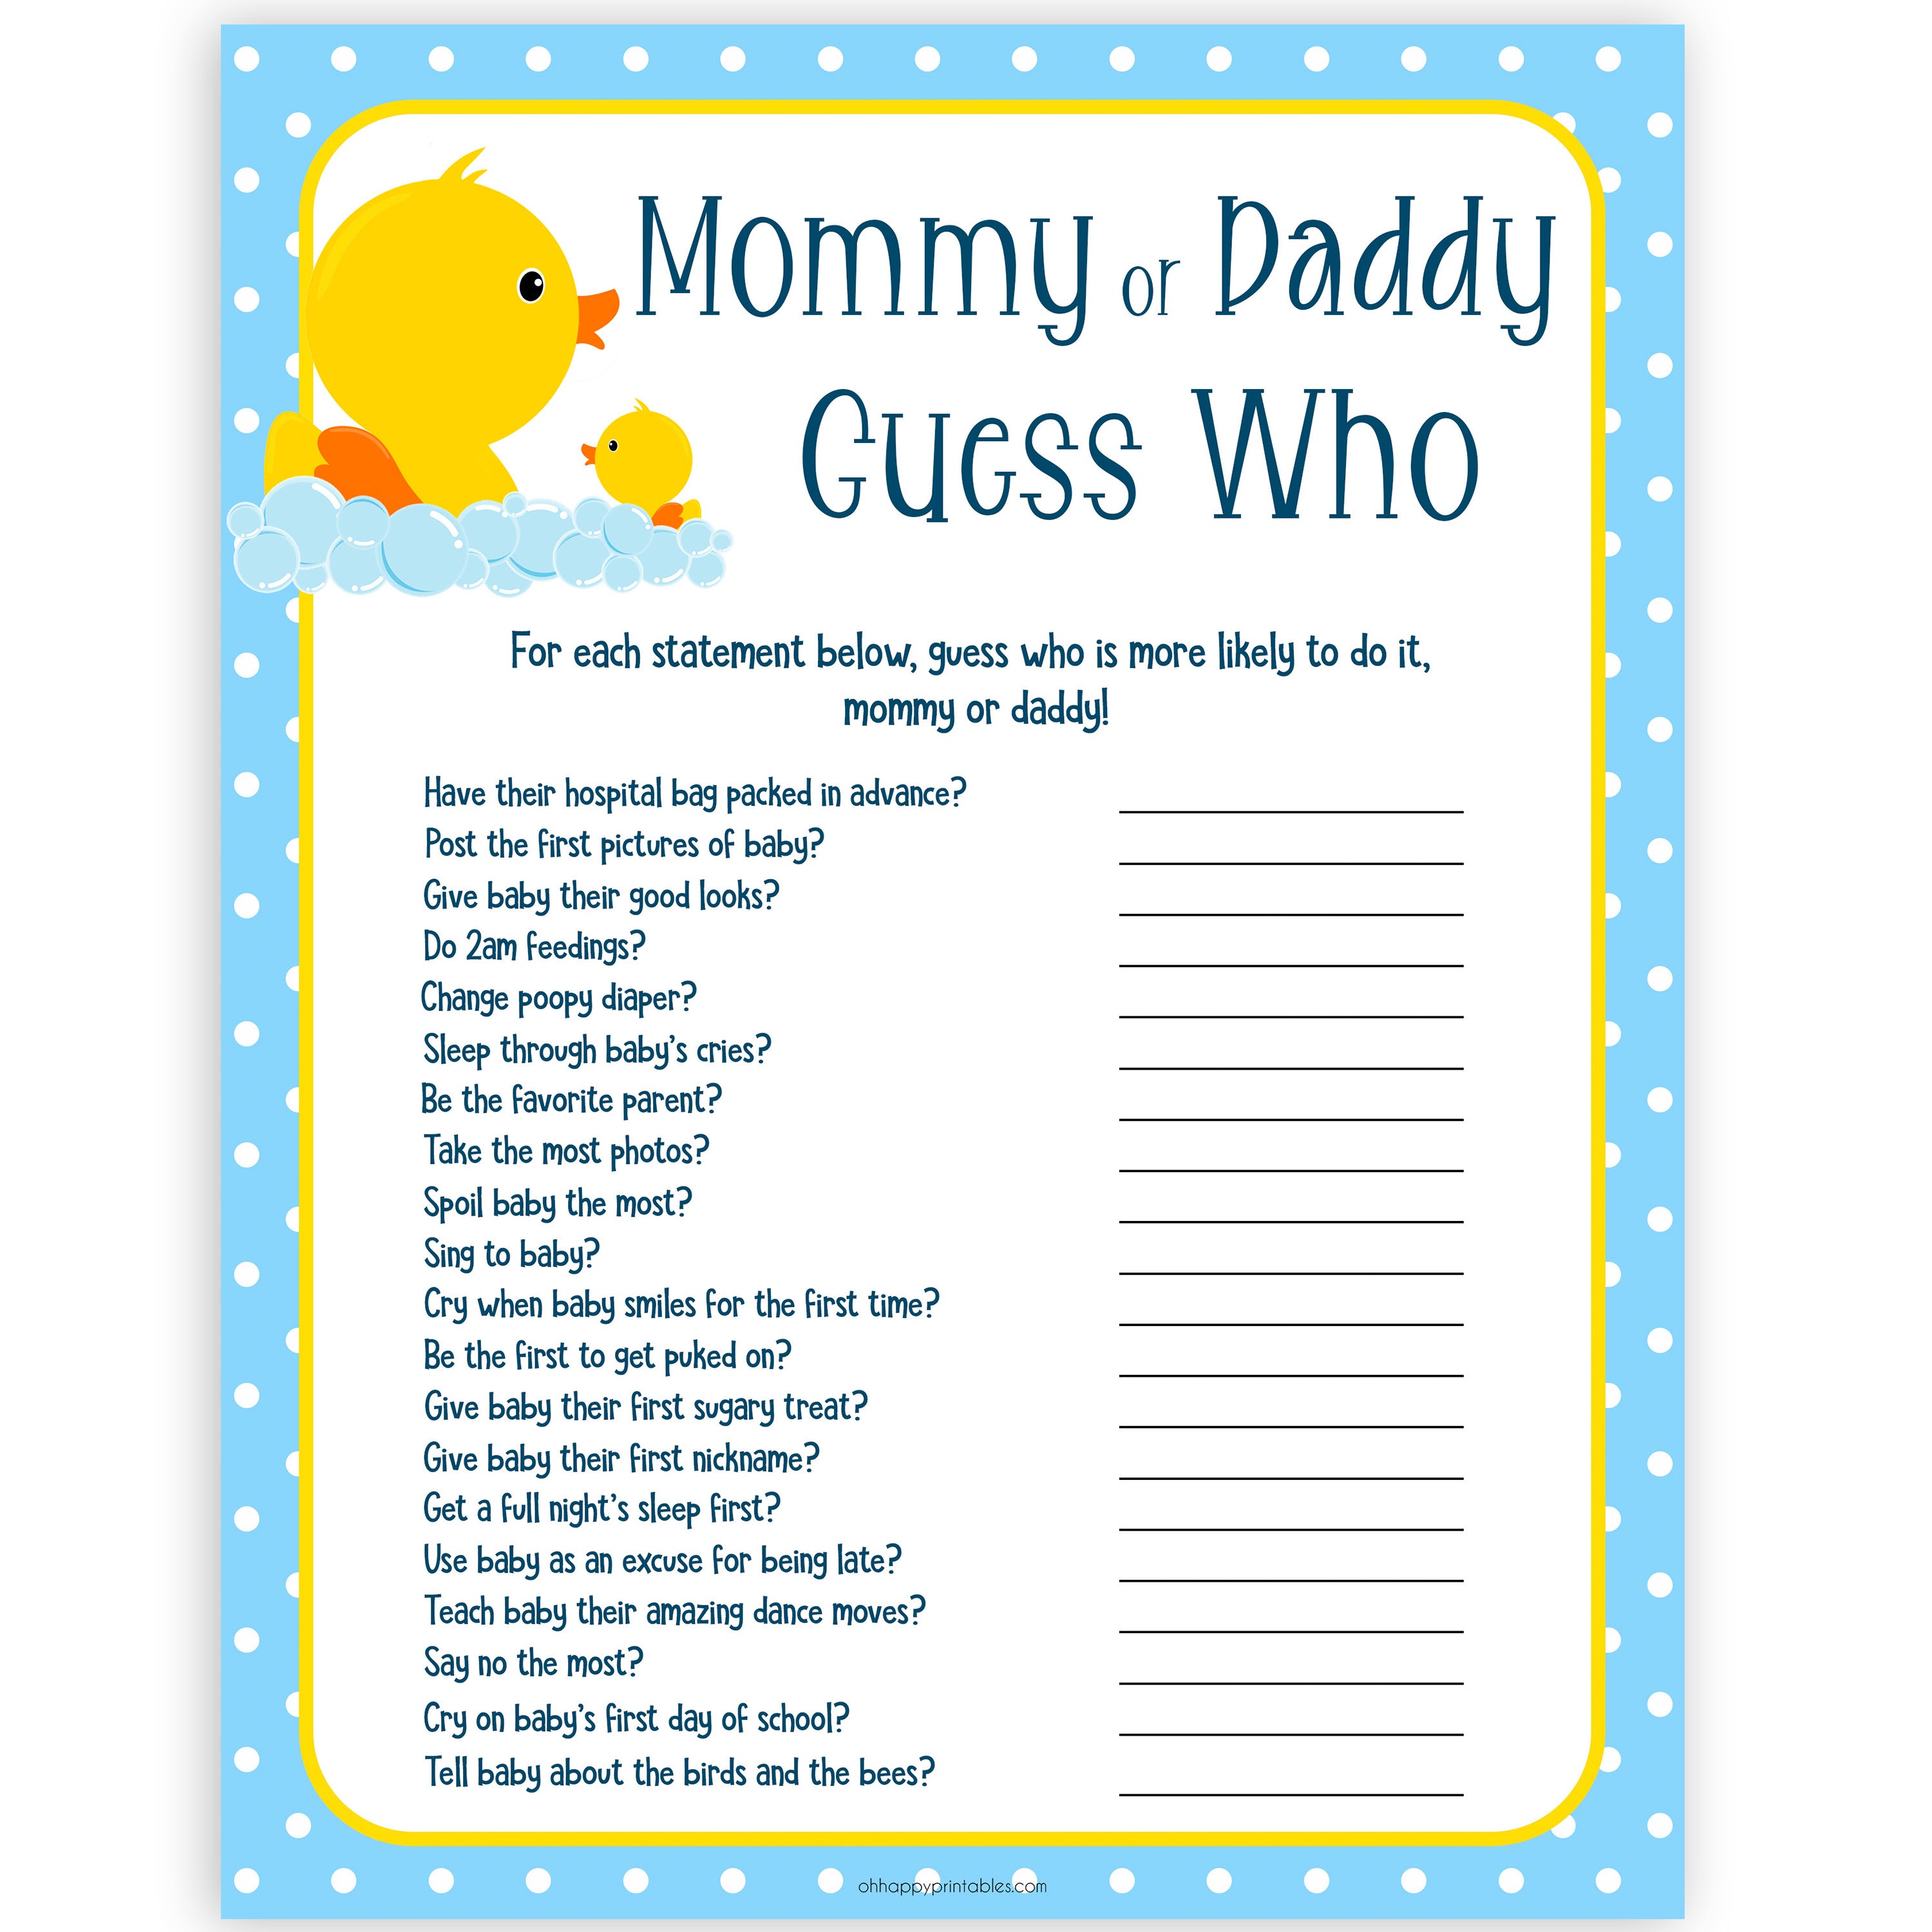 rubber ducky baby games, mommy daddy guess who game, baby game, printable baby games, baby shower games, rubber ducky baby theme, fun baby games, popular baby games